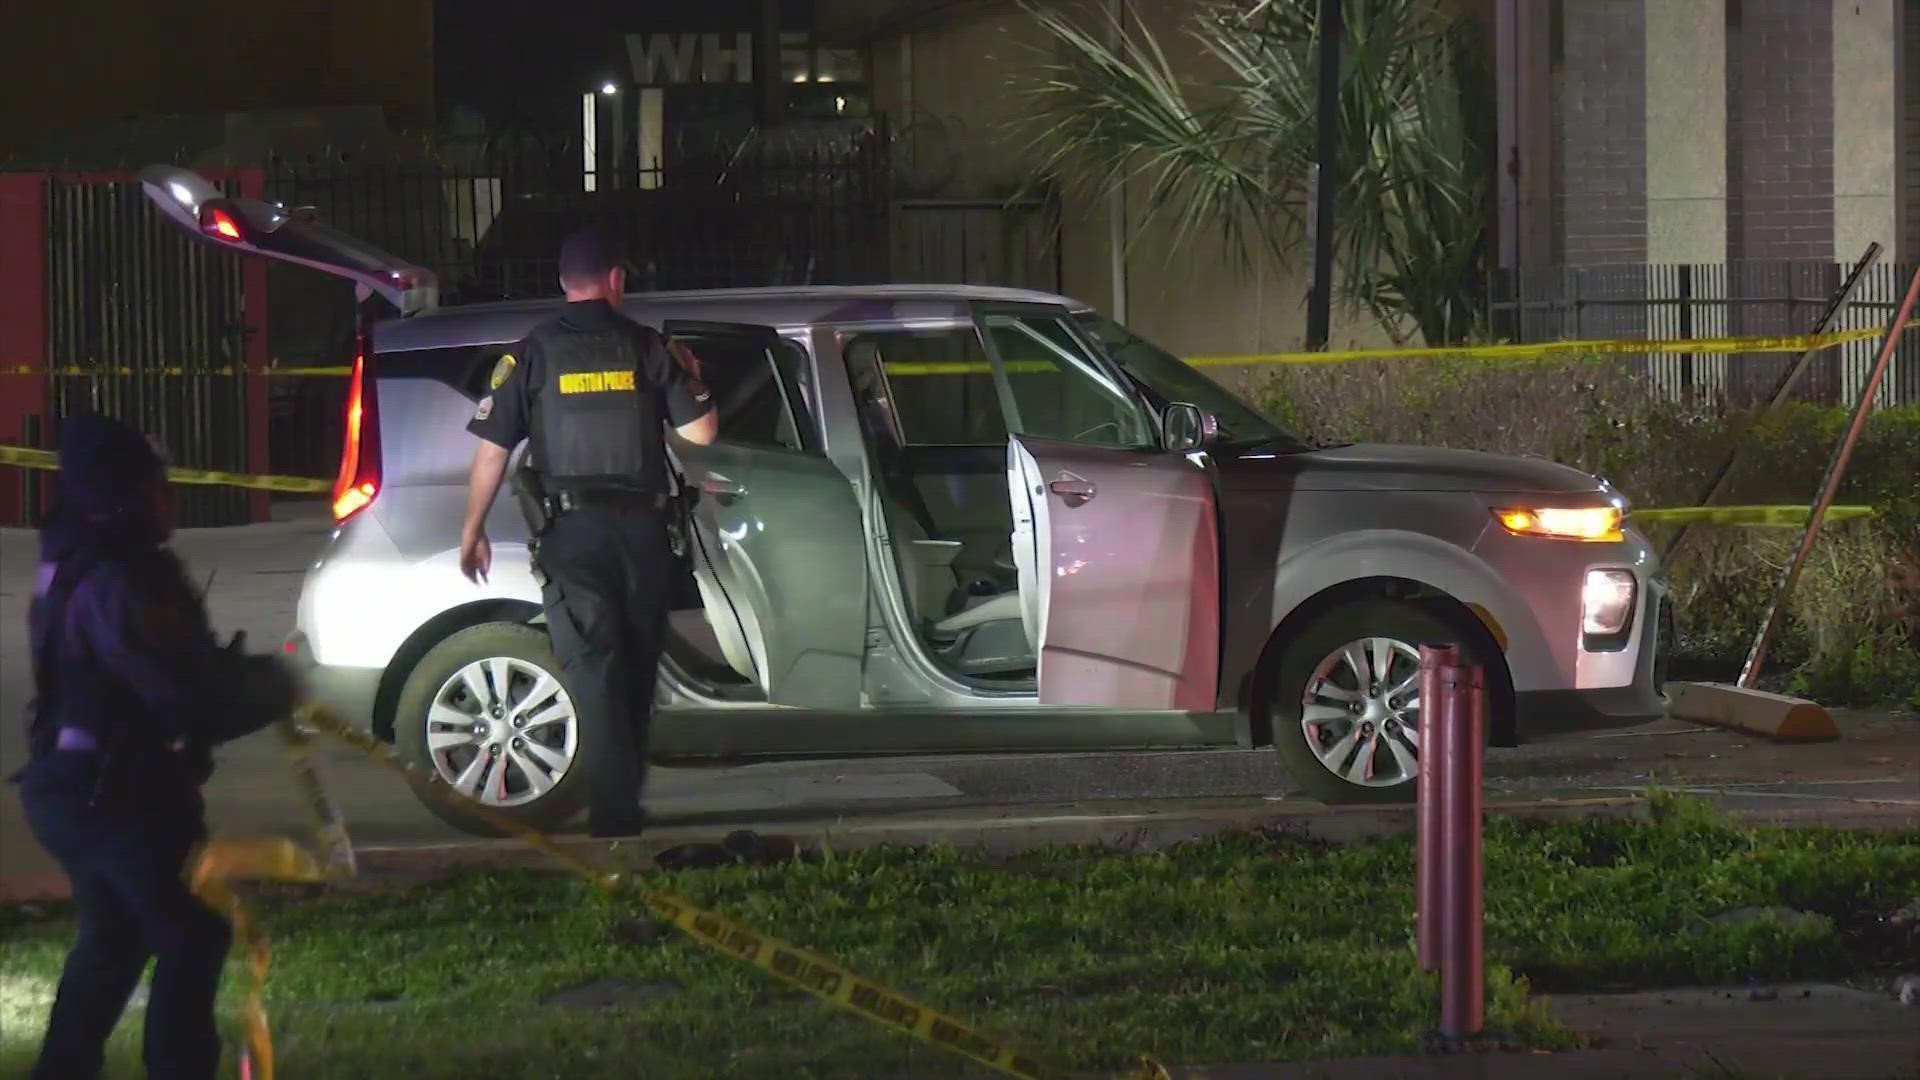 One man was shot, and another was arrested by police following a chase that ended in southwest Houston early Monday.